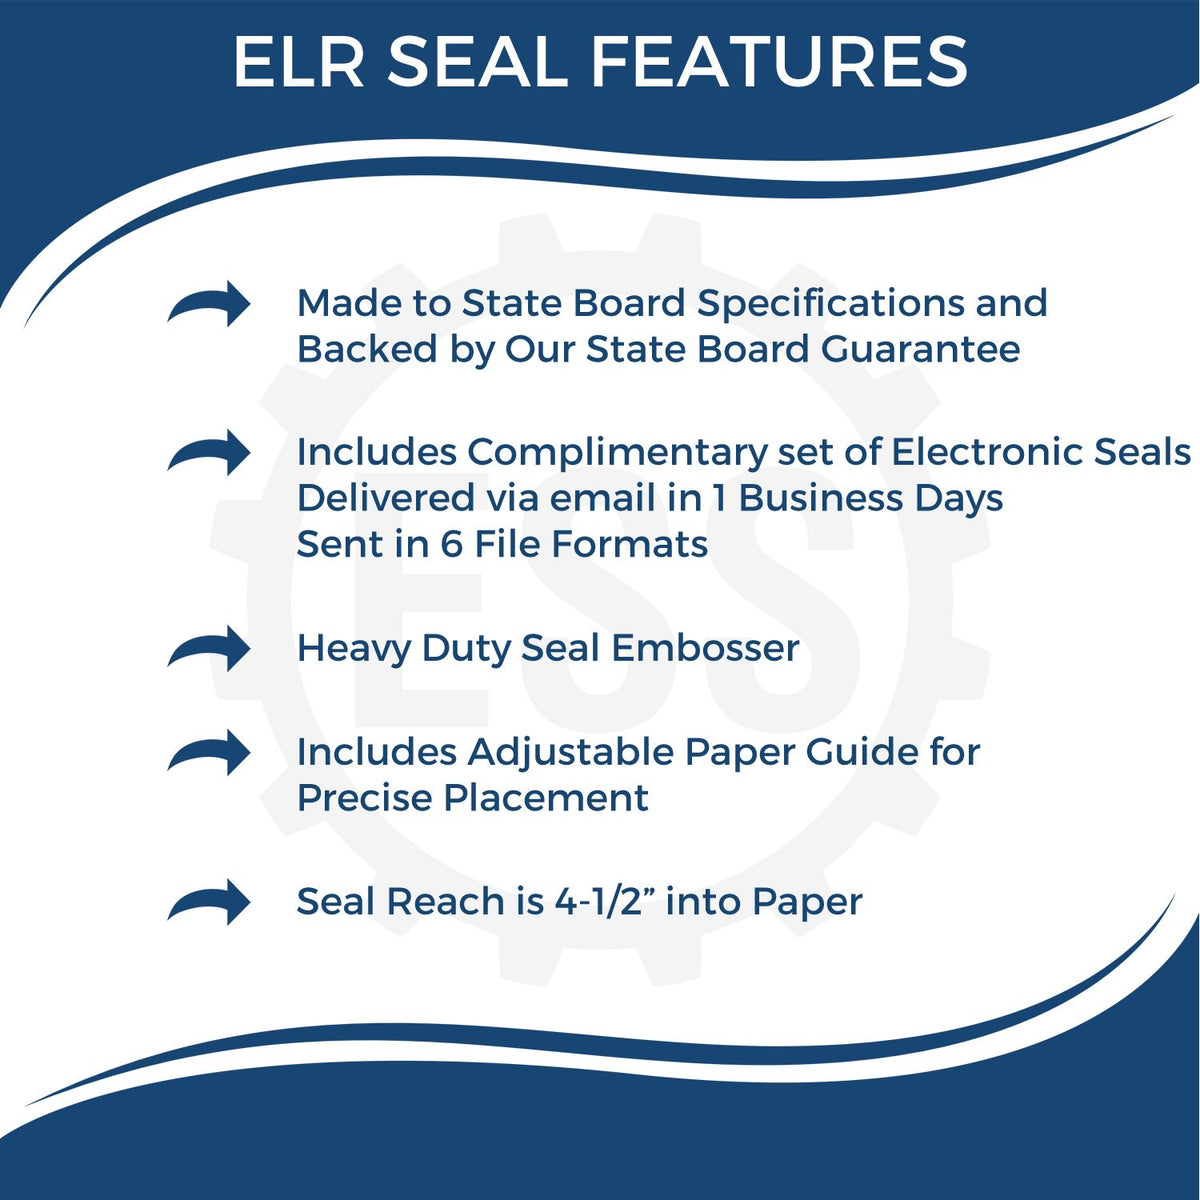 A picture of an infographic highlighting the selling points for the Extended Long Reach Rhode Island Architect Seal Embosser